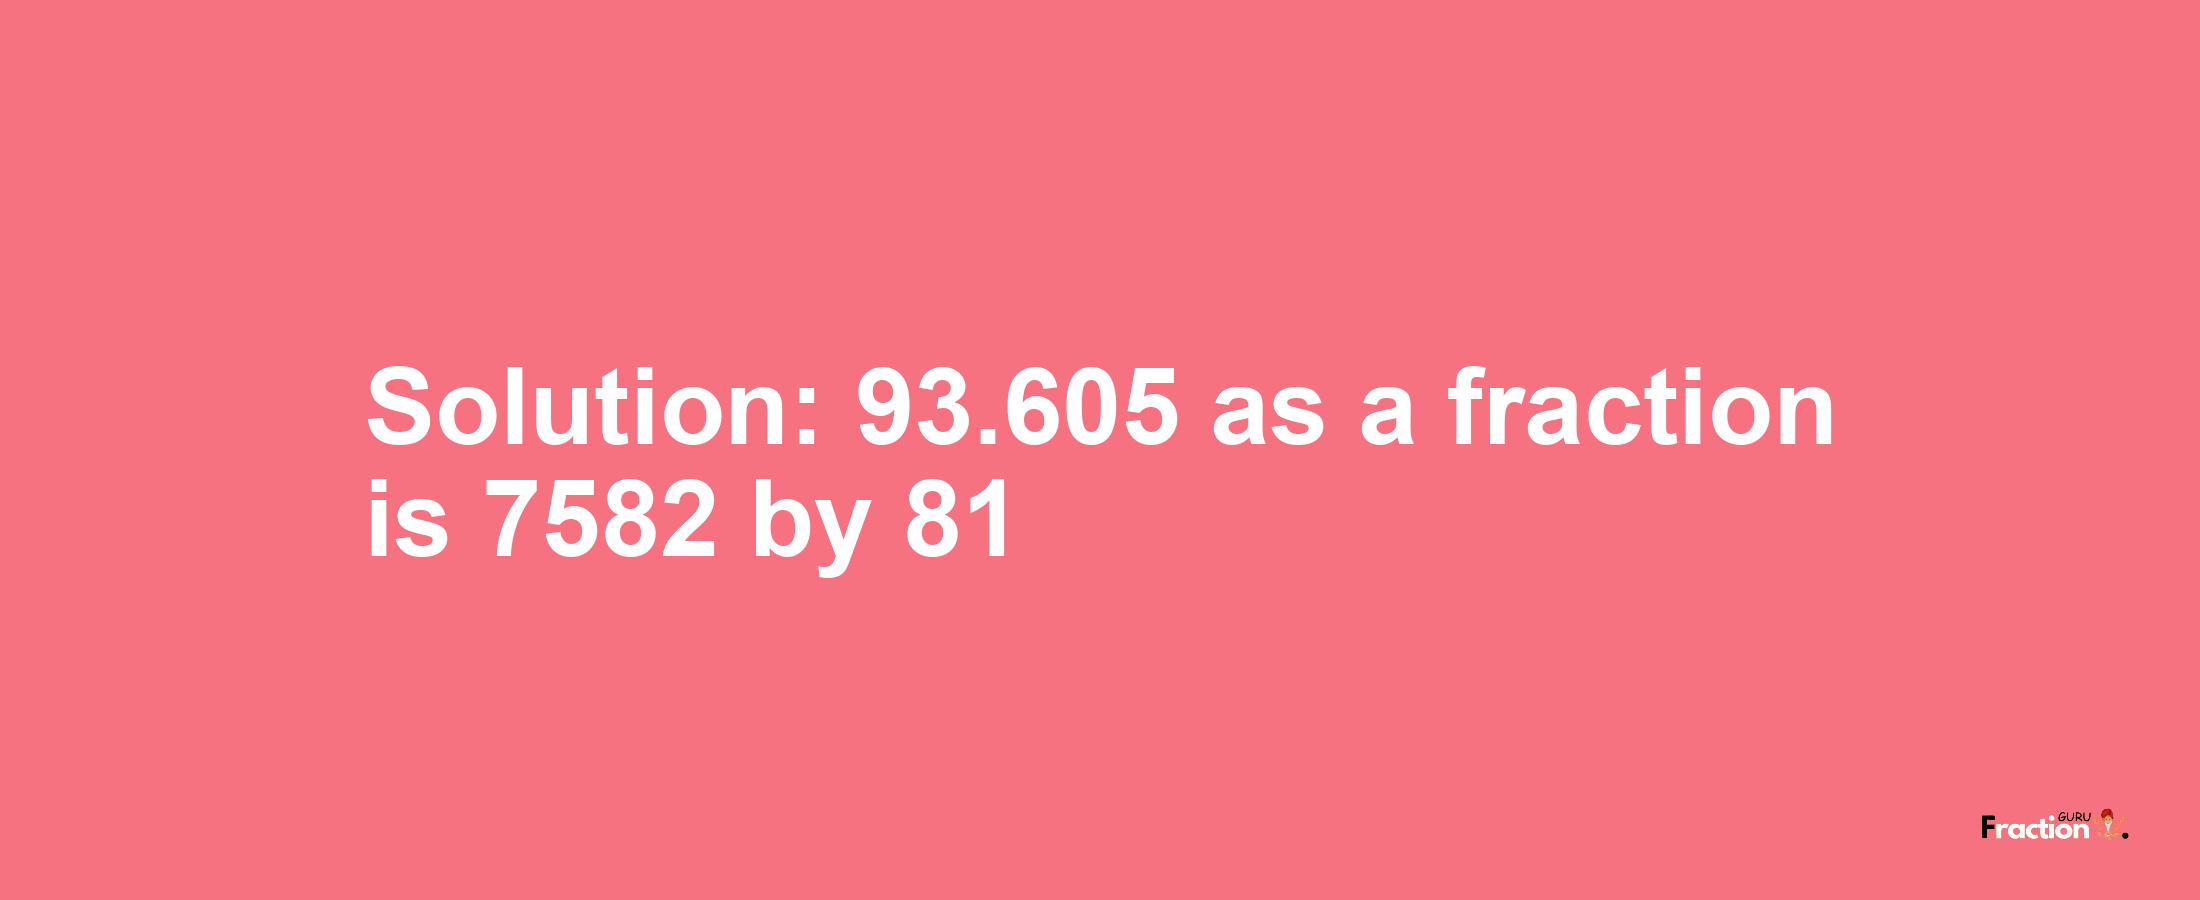 Solution:93.605 as a fraction is 7582/81